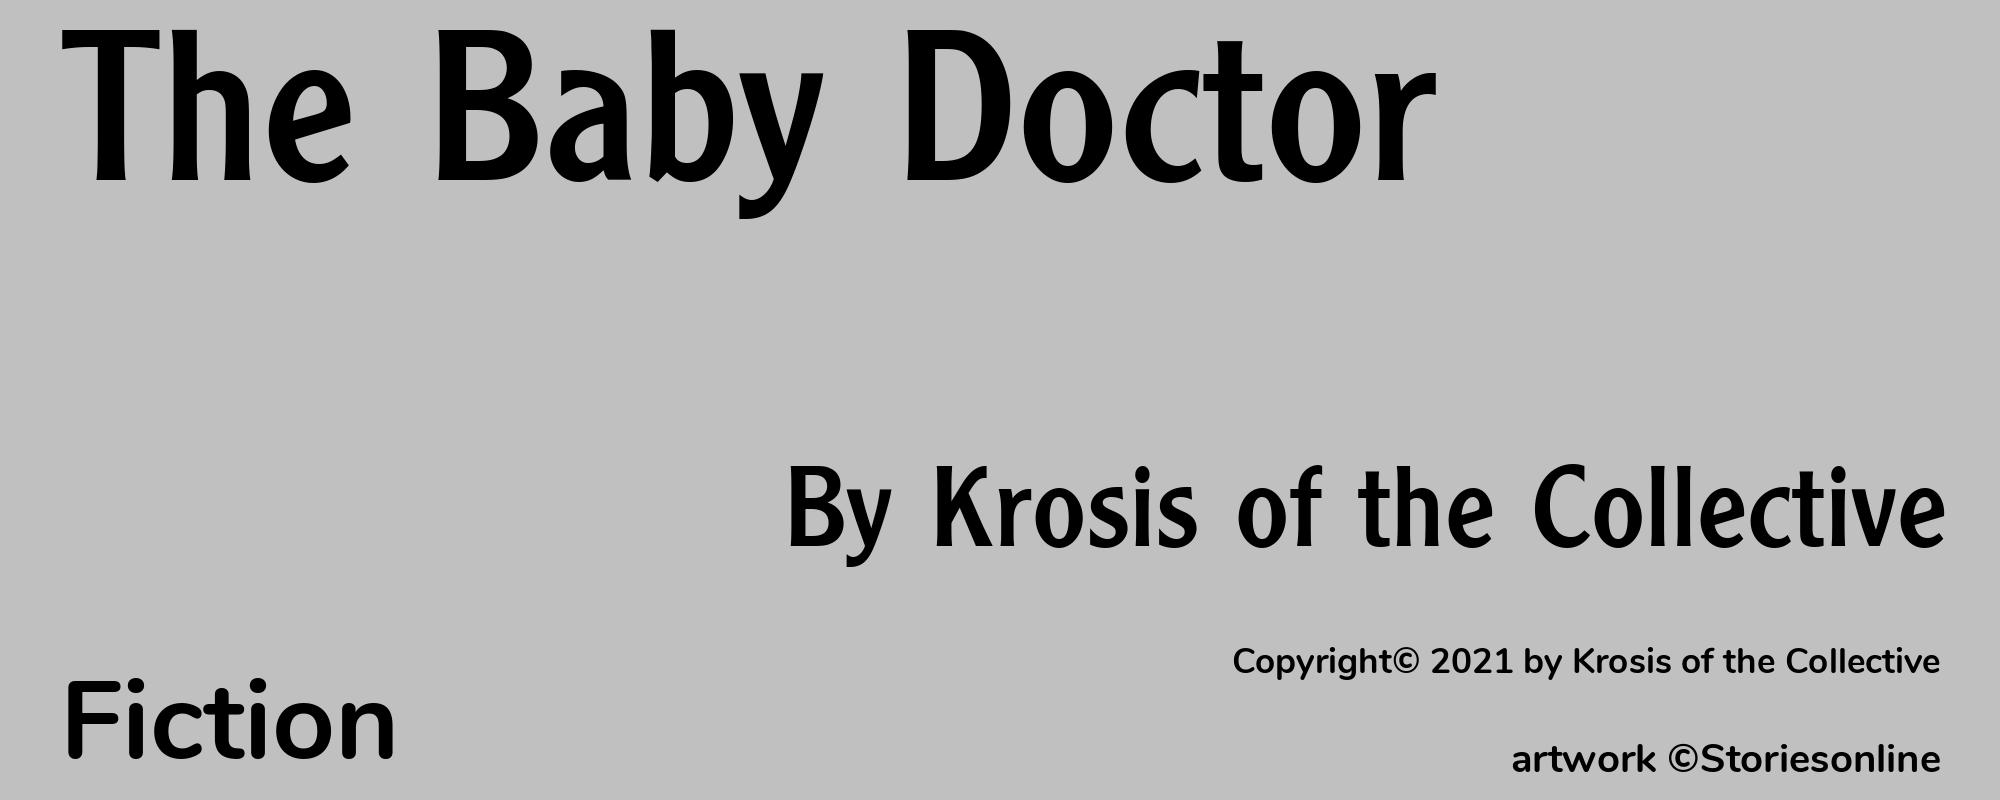 The Baby Doctor - Cover